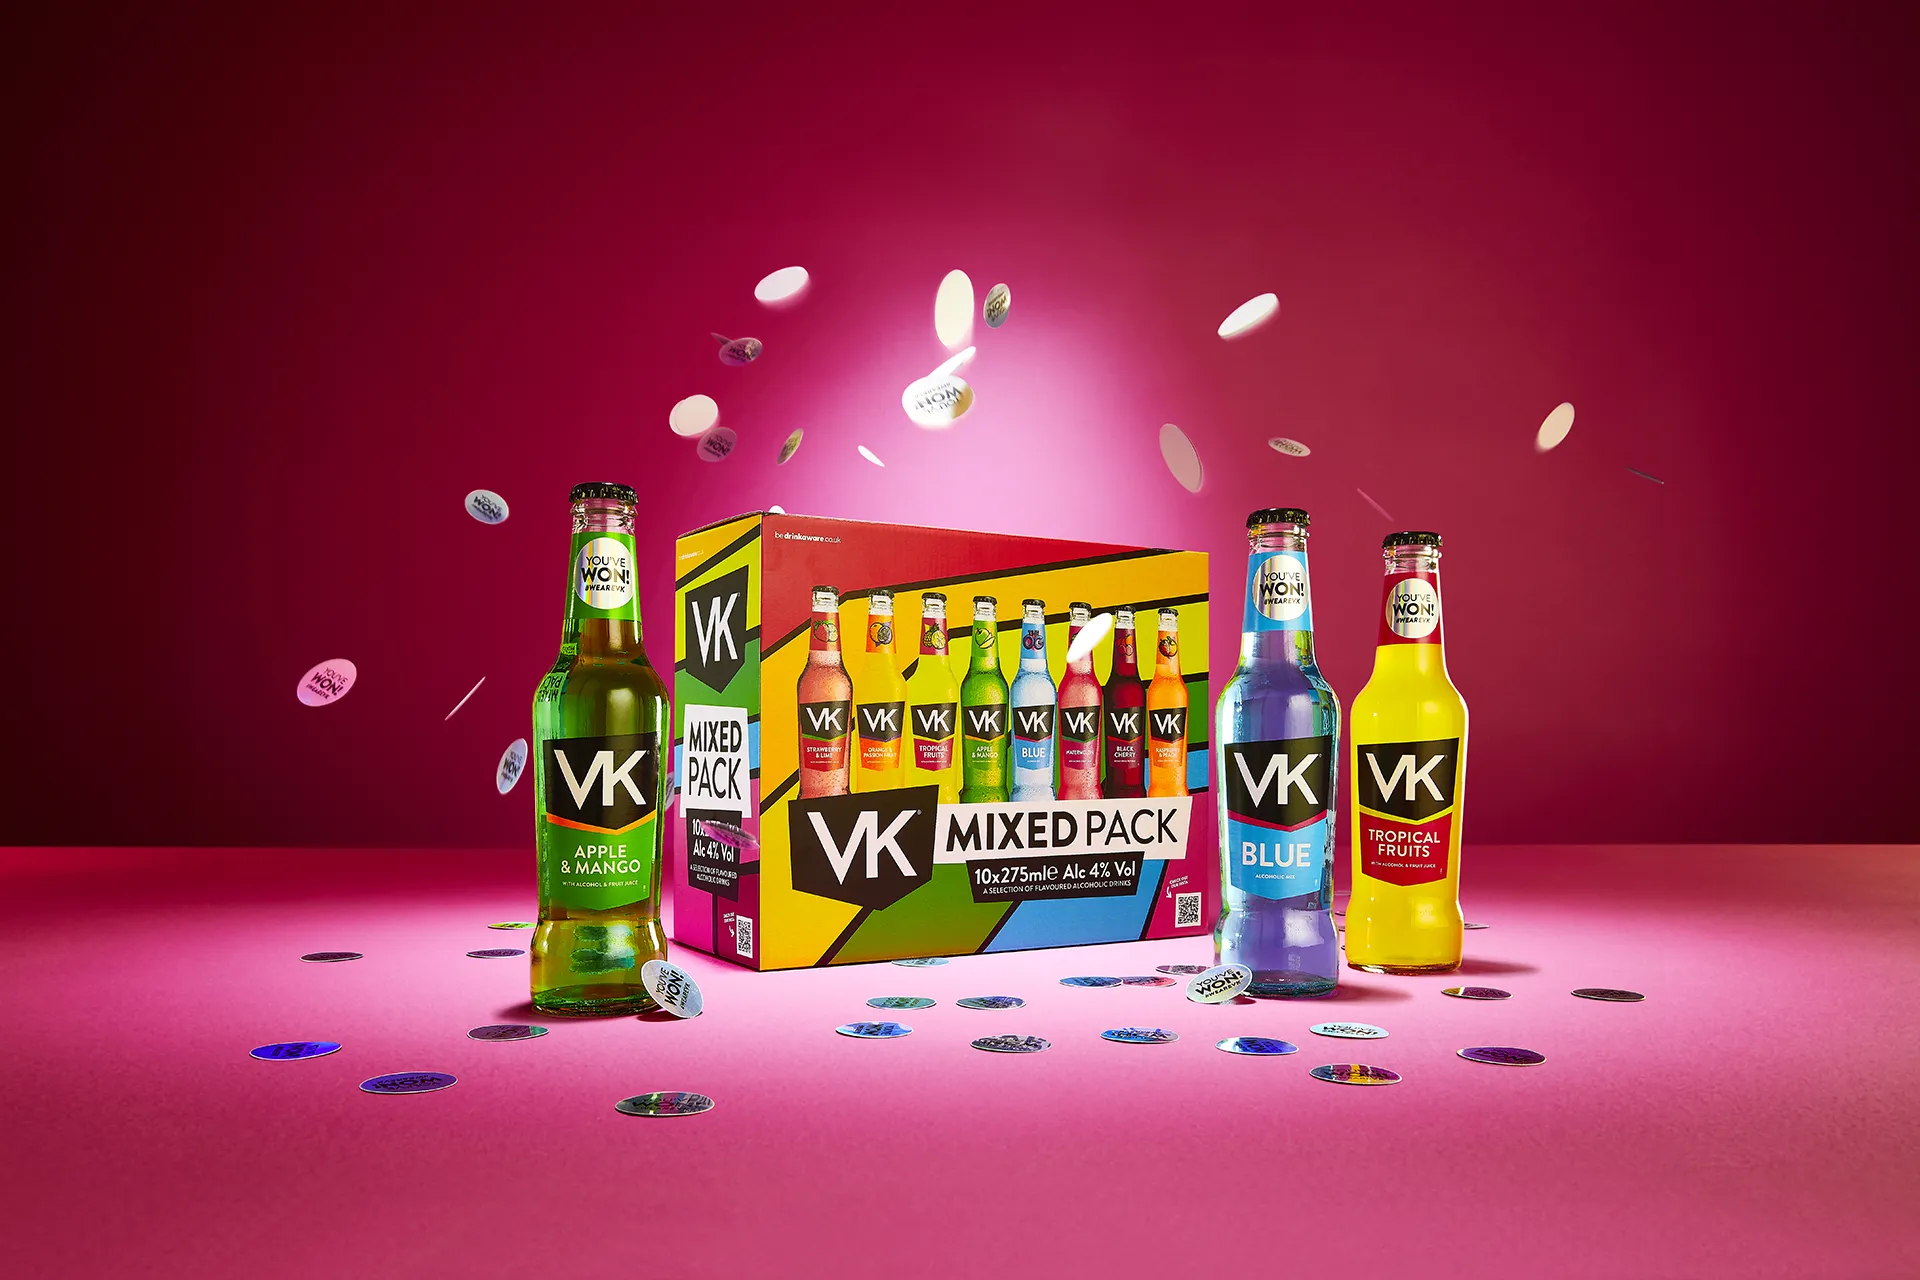 VK mixed pack product photo with green, blue and tropical fruits flavours on pink background